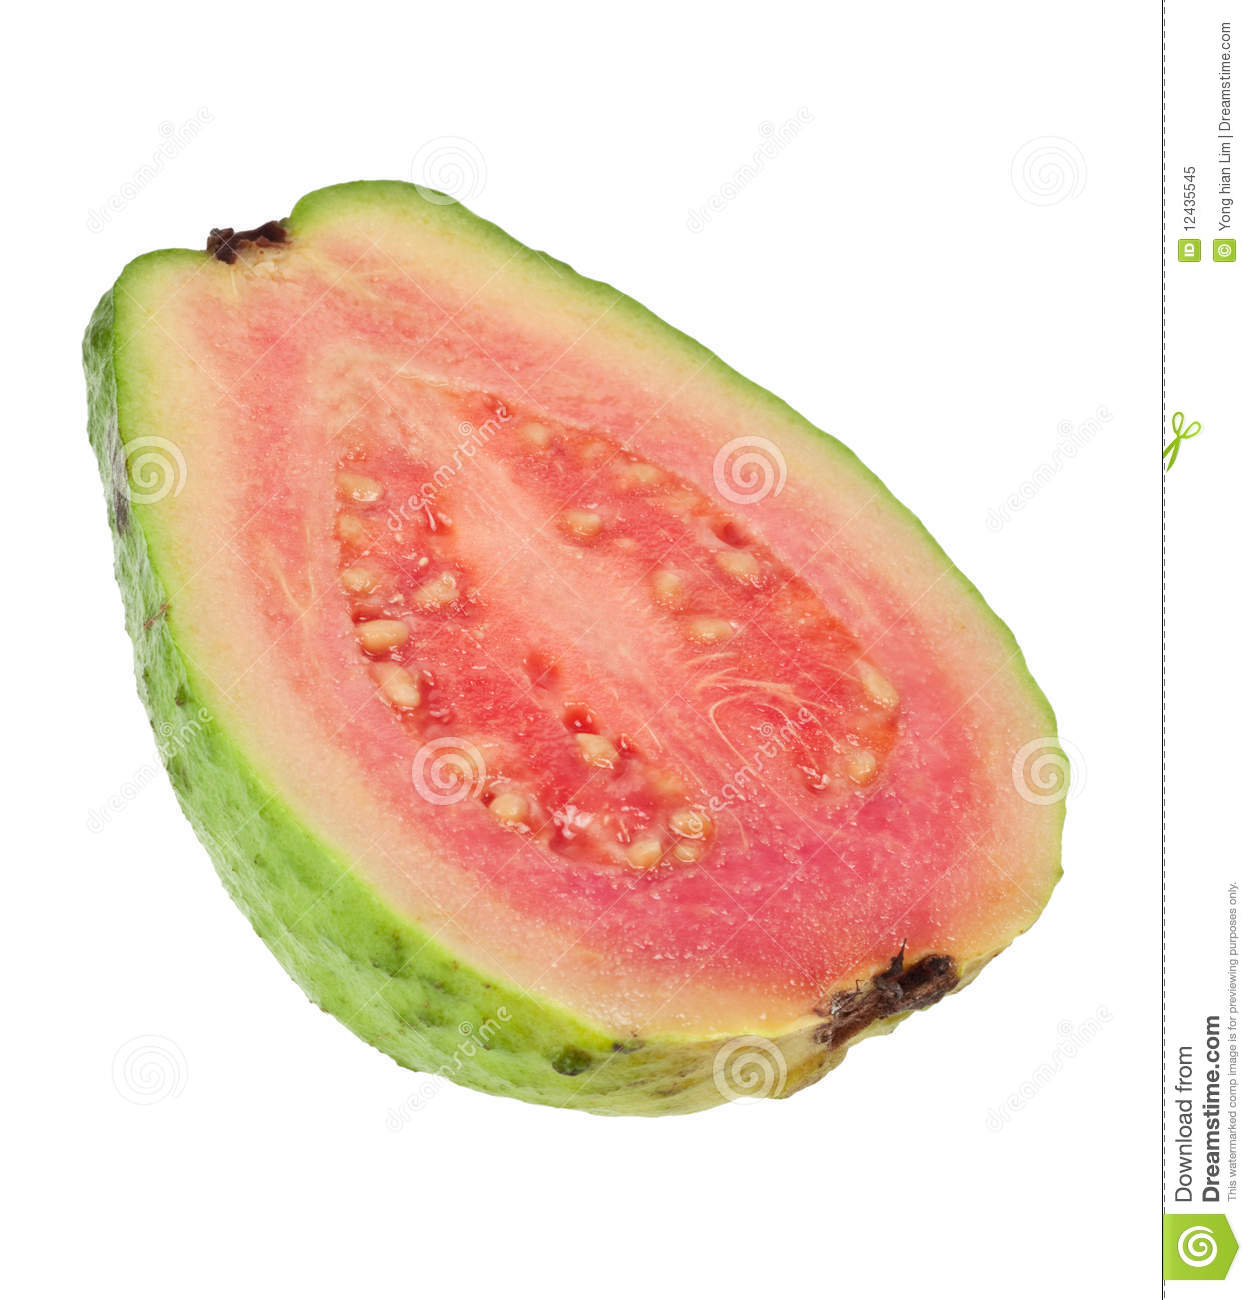 More Similar Stock Images Of   Cross Section Of A Pink Guava